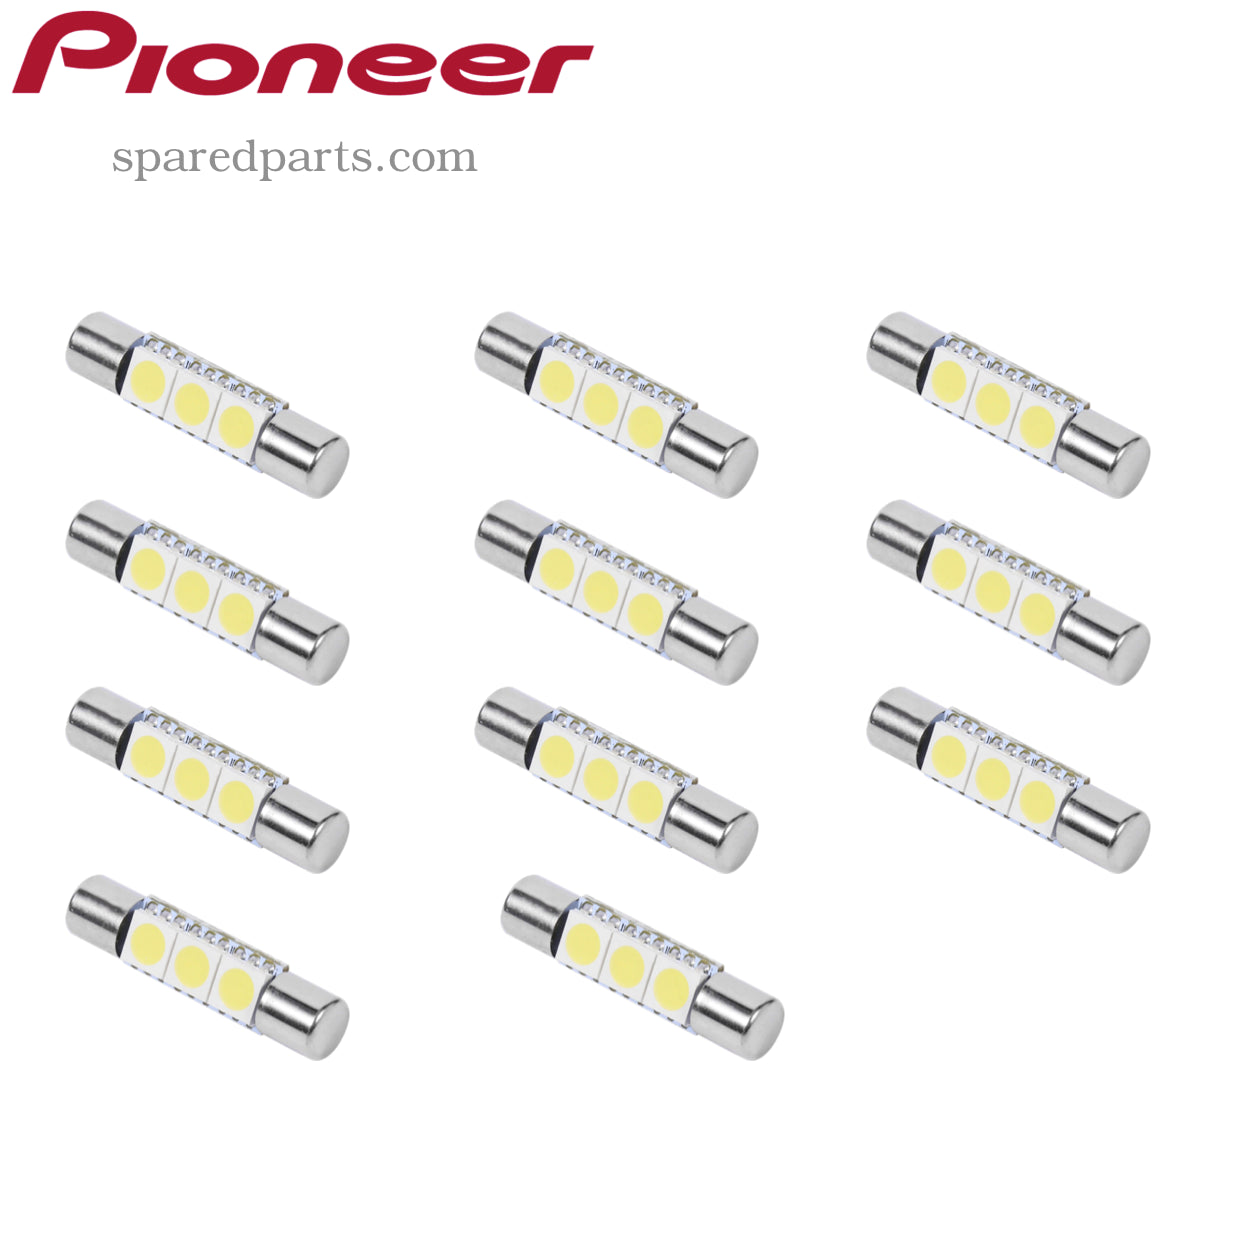 Pioneer QX-9900 Fuse Type Lamps (LED Upgrade)